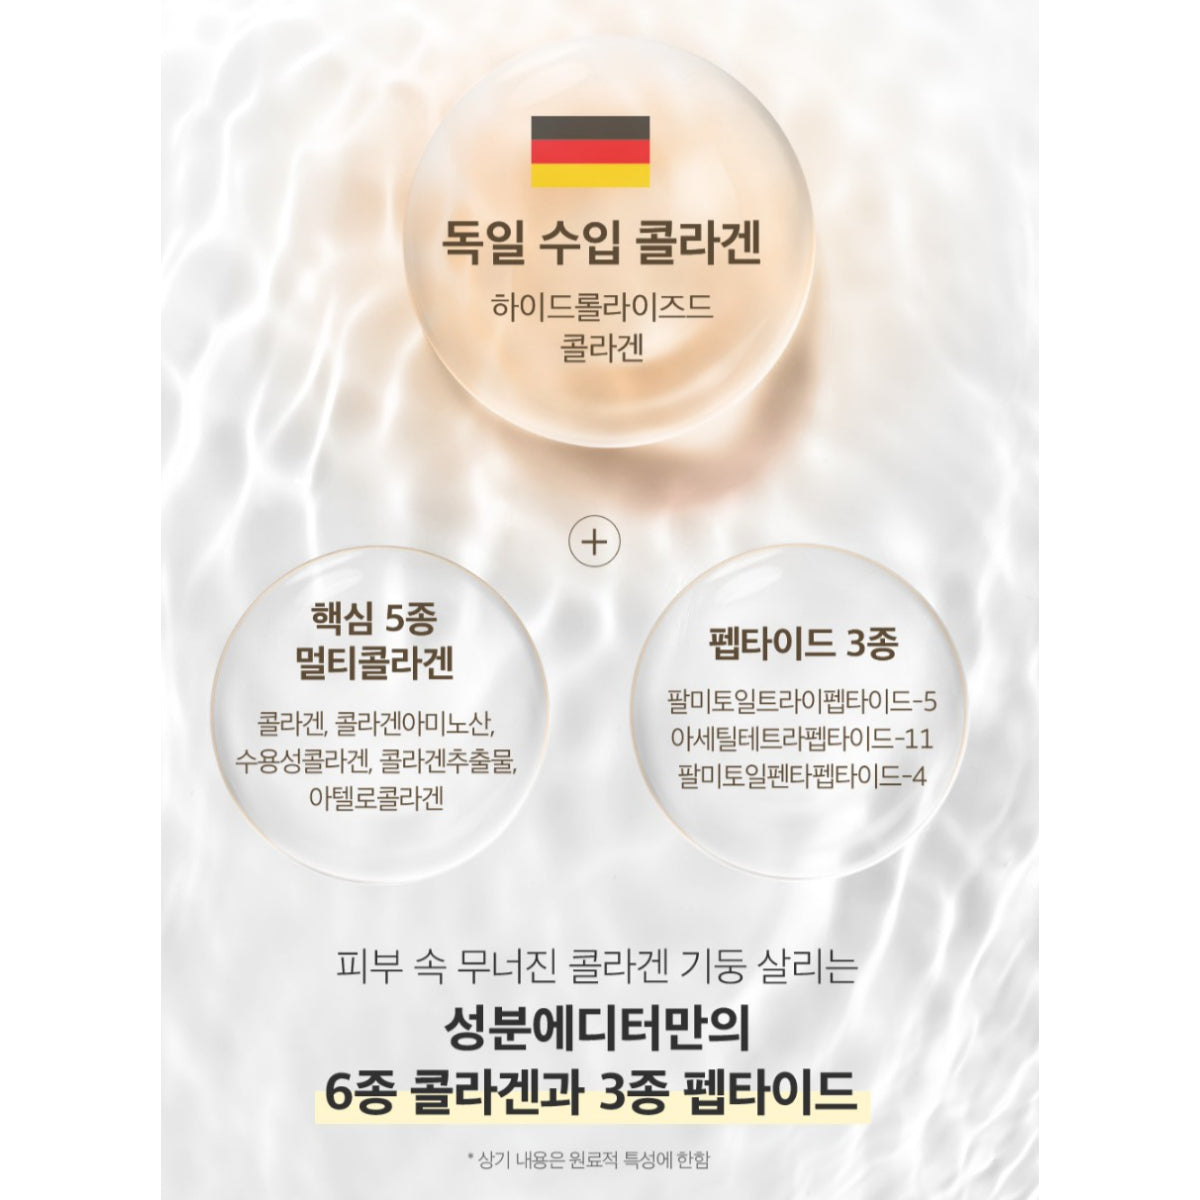 SUNGBOON EDITOR Youngran White Mushroom Collagen Facegloss 30ml/bottle Whitening Wrinkle Care Anti-aging Lifting Firming Pore Care / from Seoul, Korea